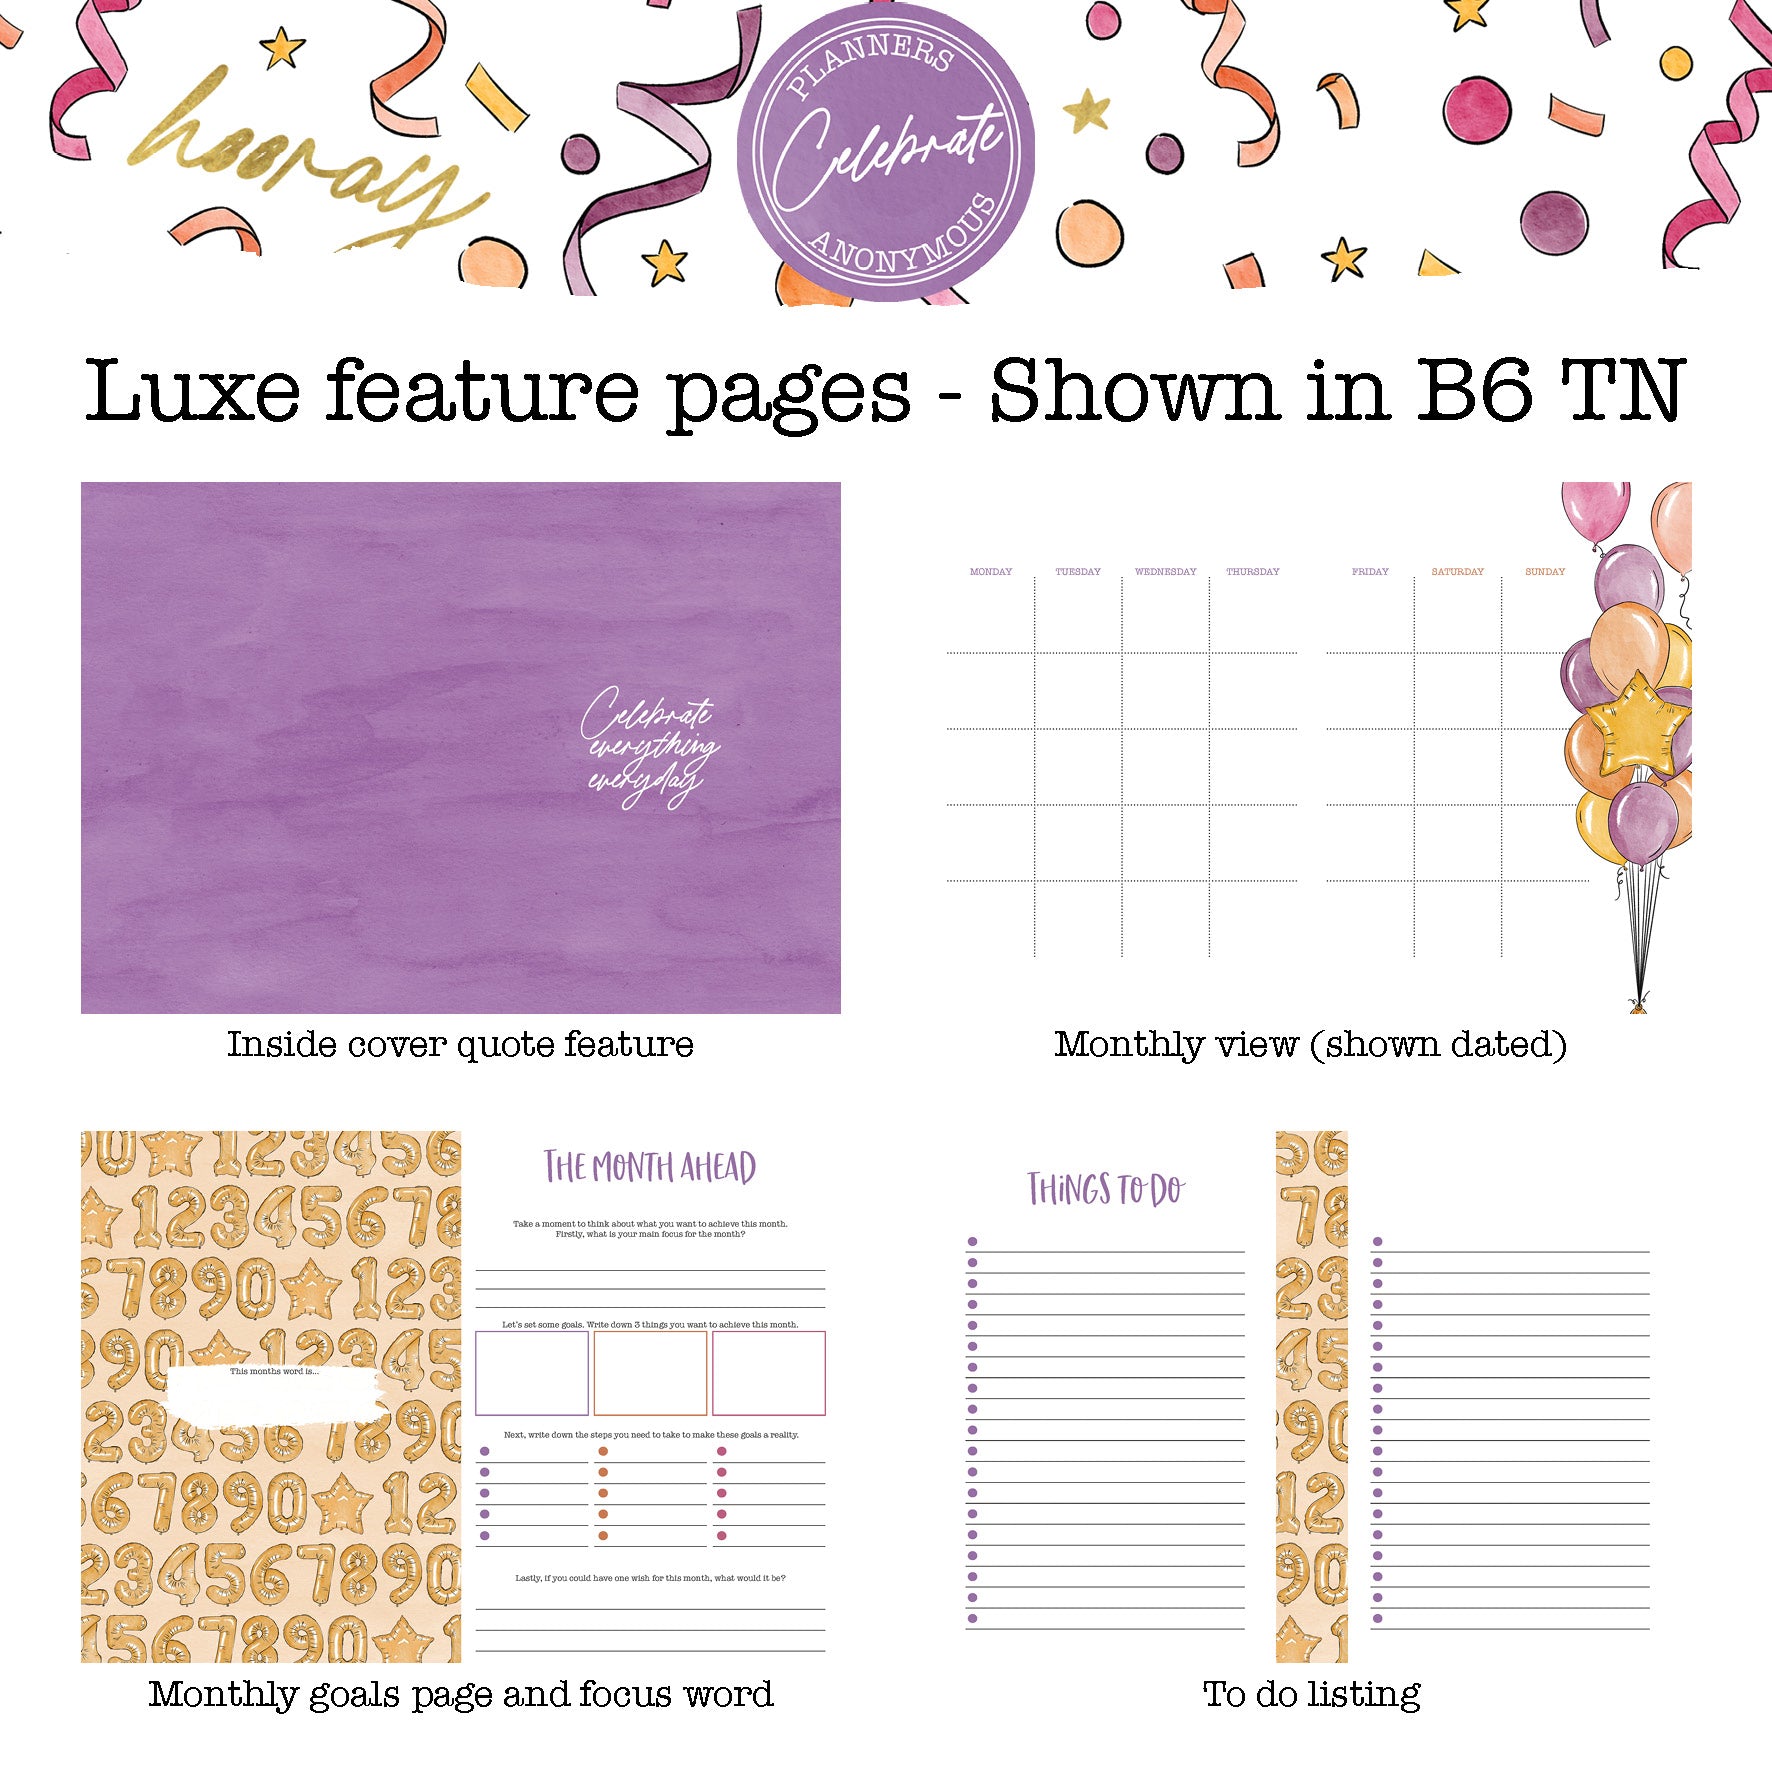 Celebrate - Printable Inserts - Luxe Weekly